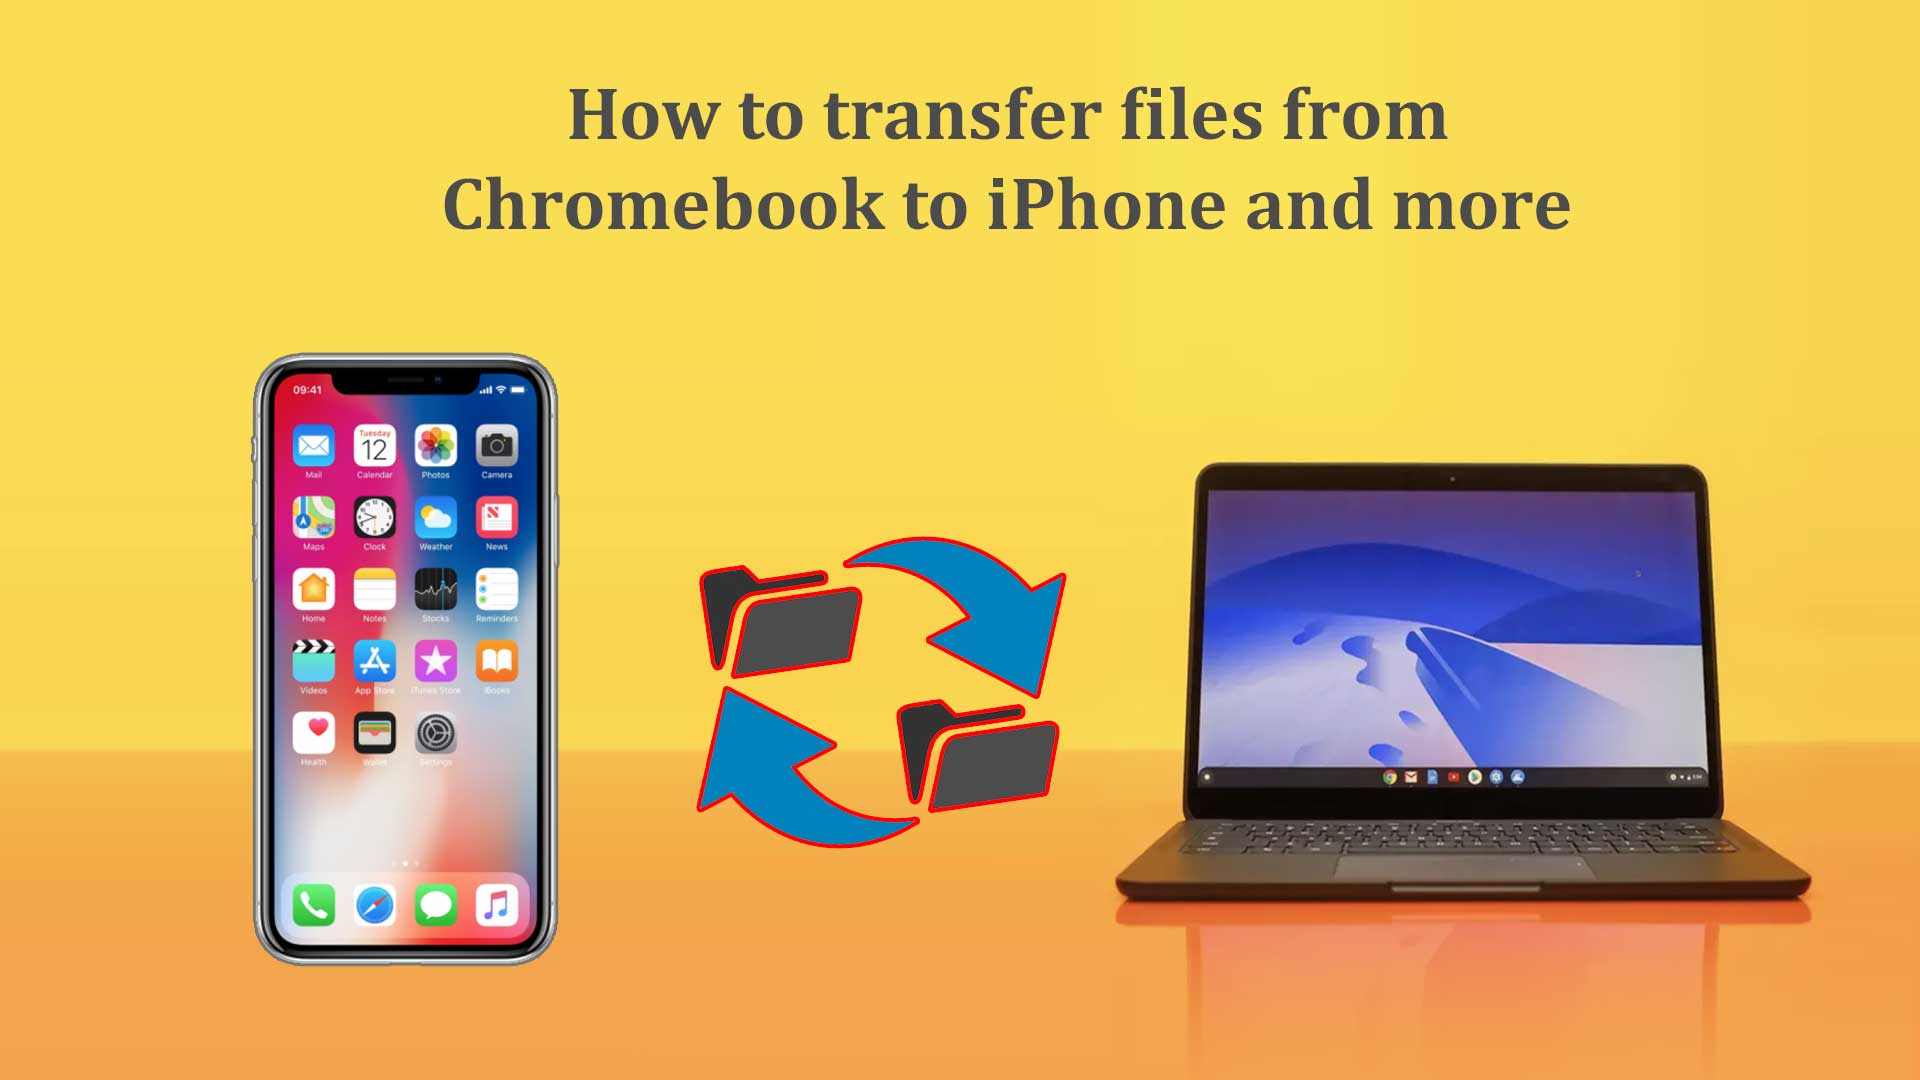 How to transfer files from Chromebook to iPhone